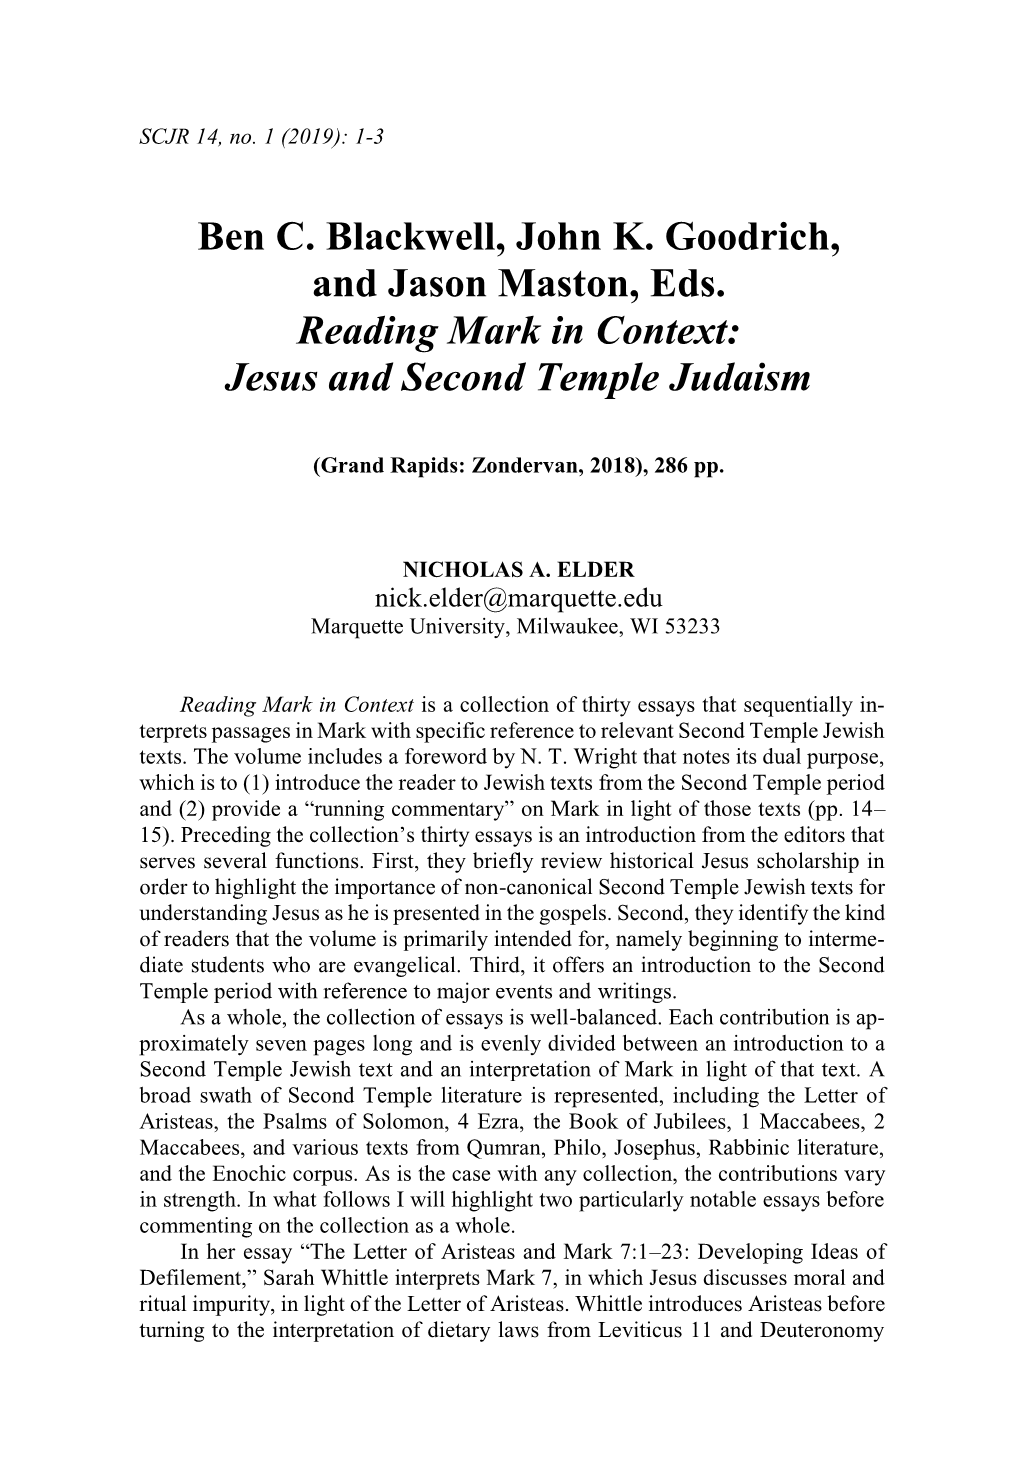 Jesus and Second Temple Judaism